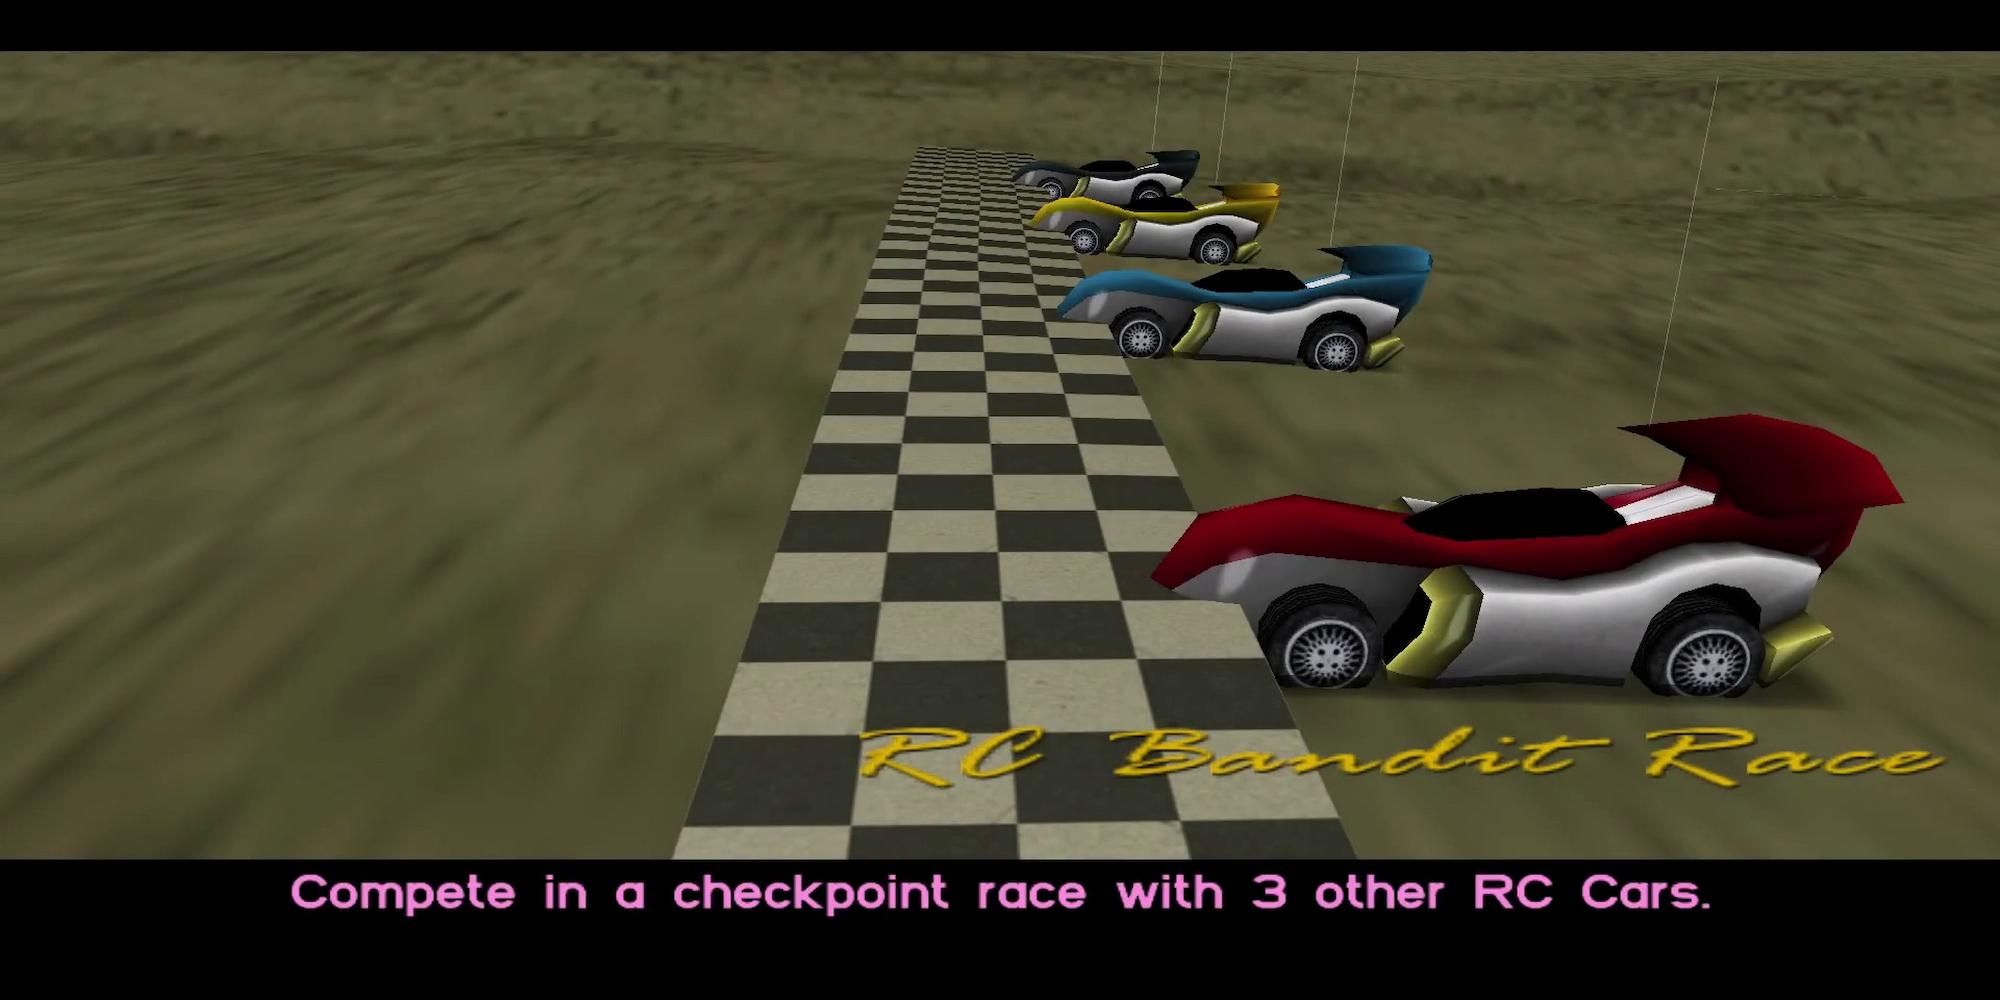 RC Bandit race about to begin in GTA VC